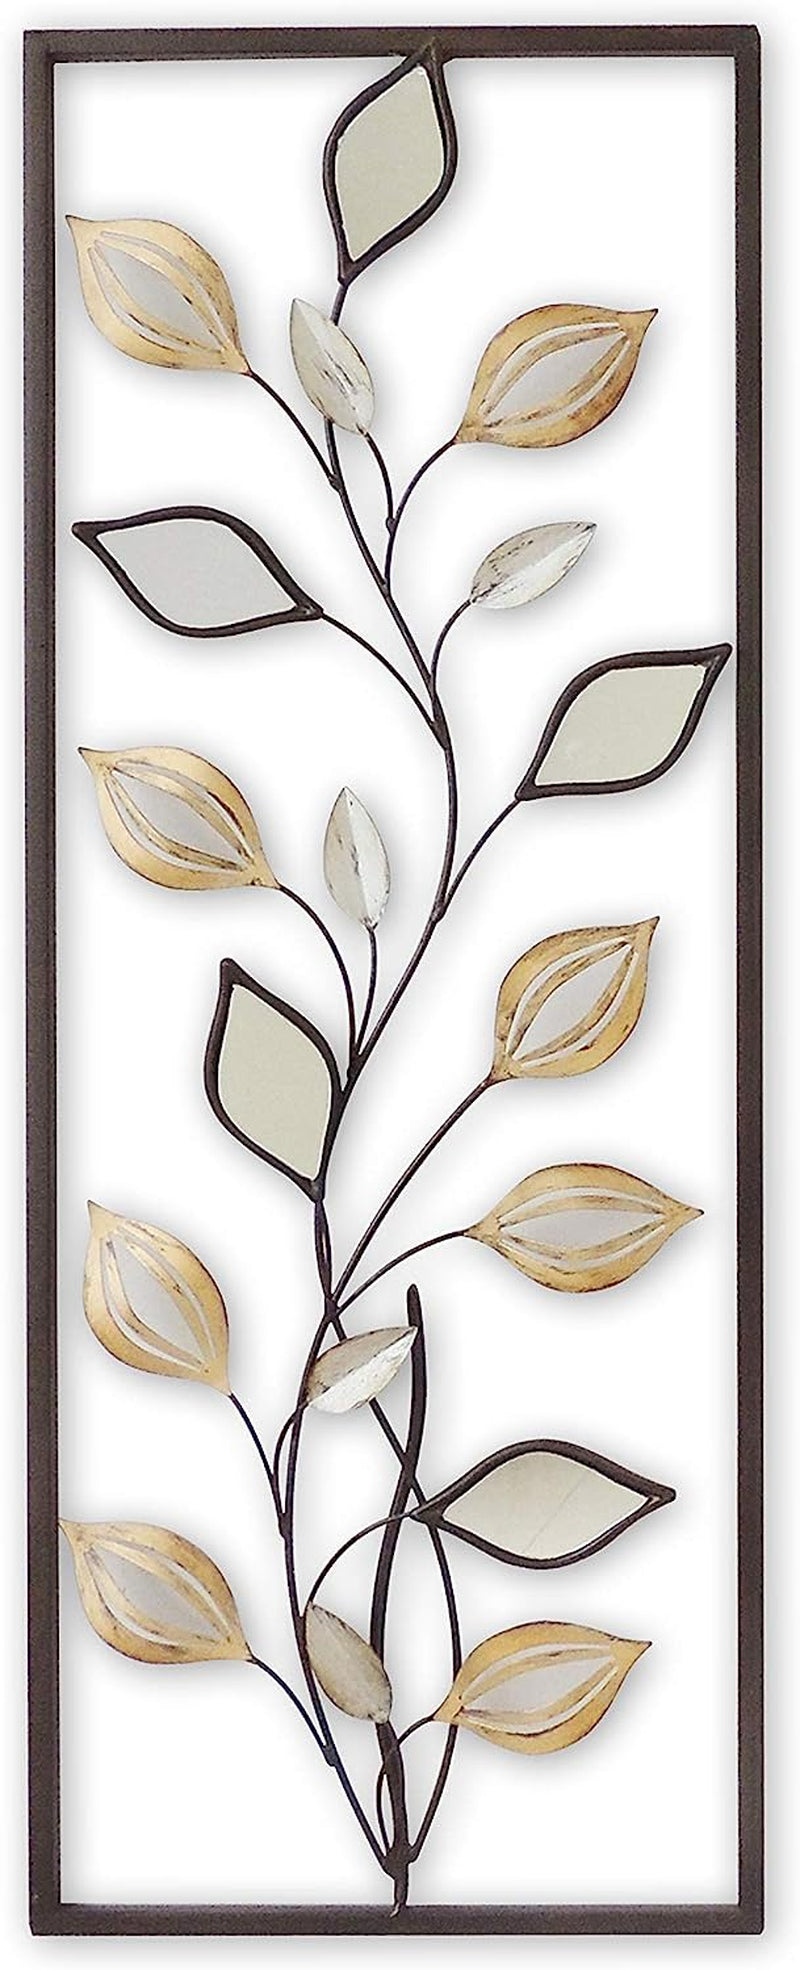  New Modern Chic Aluminum/Metal Wall Decor Frame 12"X30" (Leaves Mirrors)